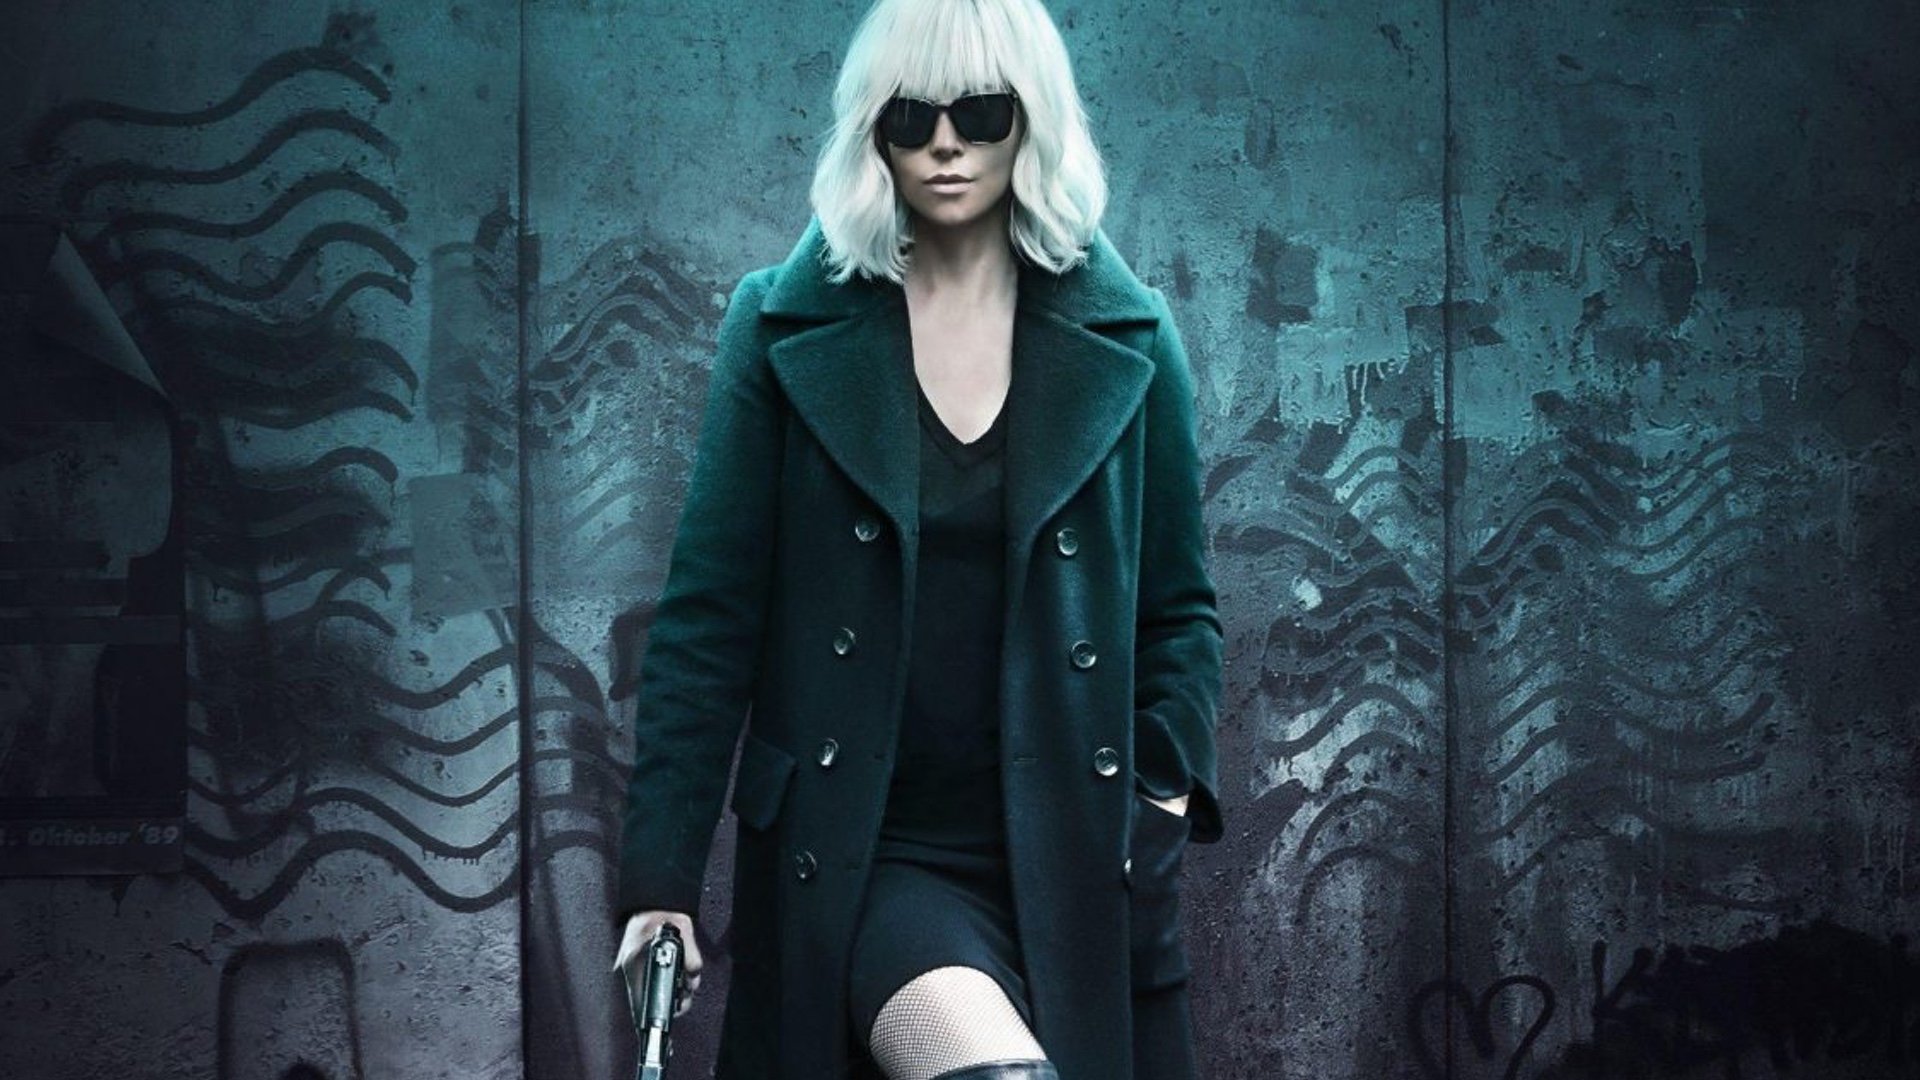 Atomic Blonde 2: All We Know About The Charlize Theron Sequel